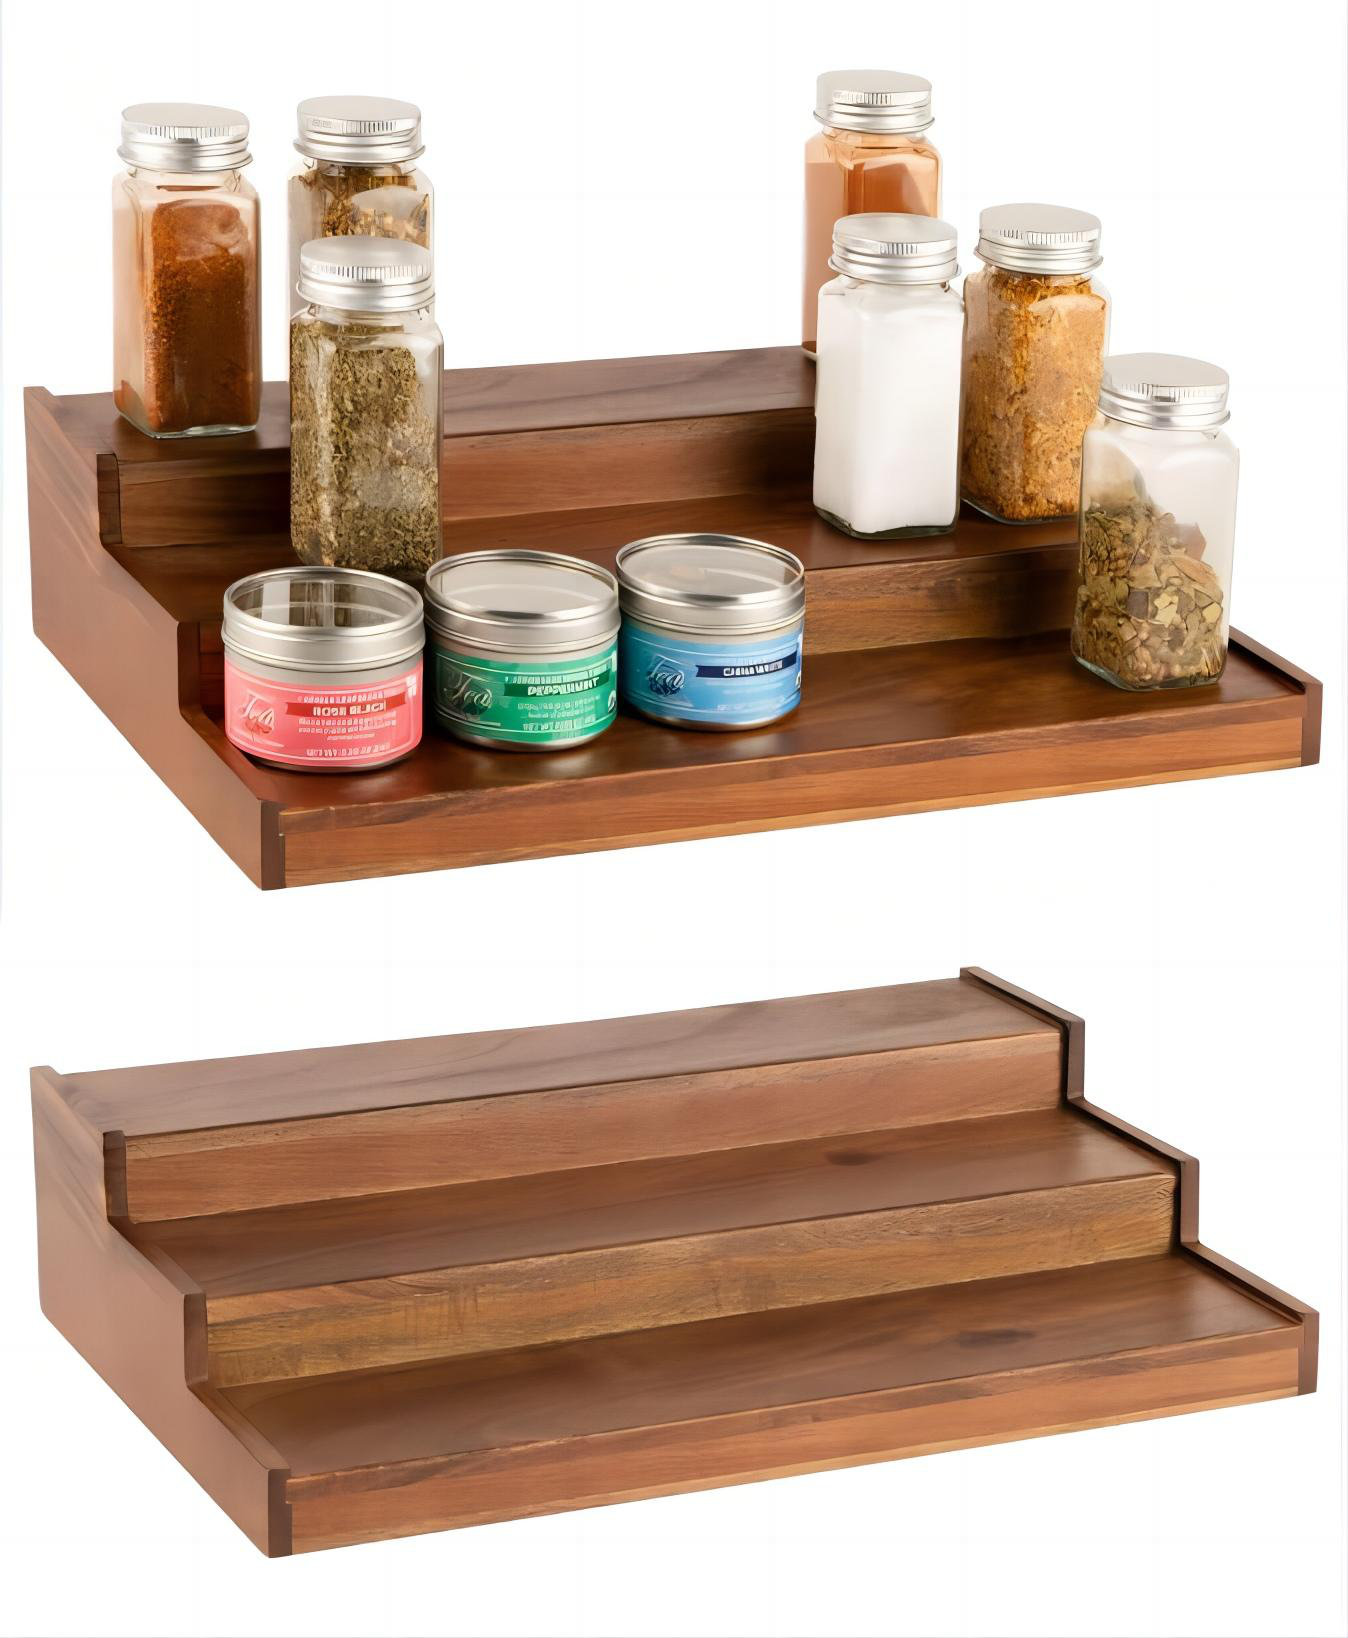 16-Jar Revolving Countertop Spice Rack with Free Spice Refills for 5 Years